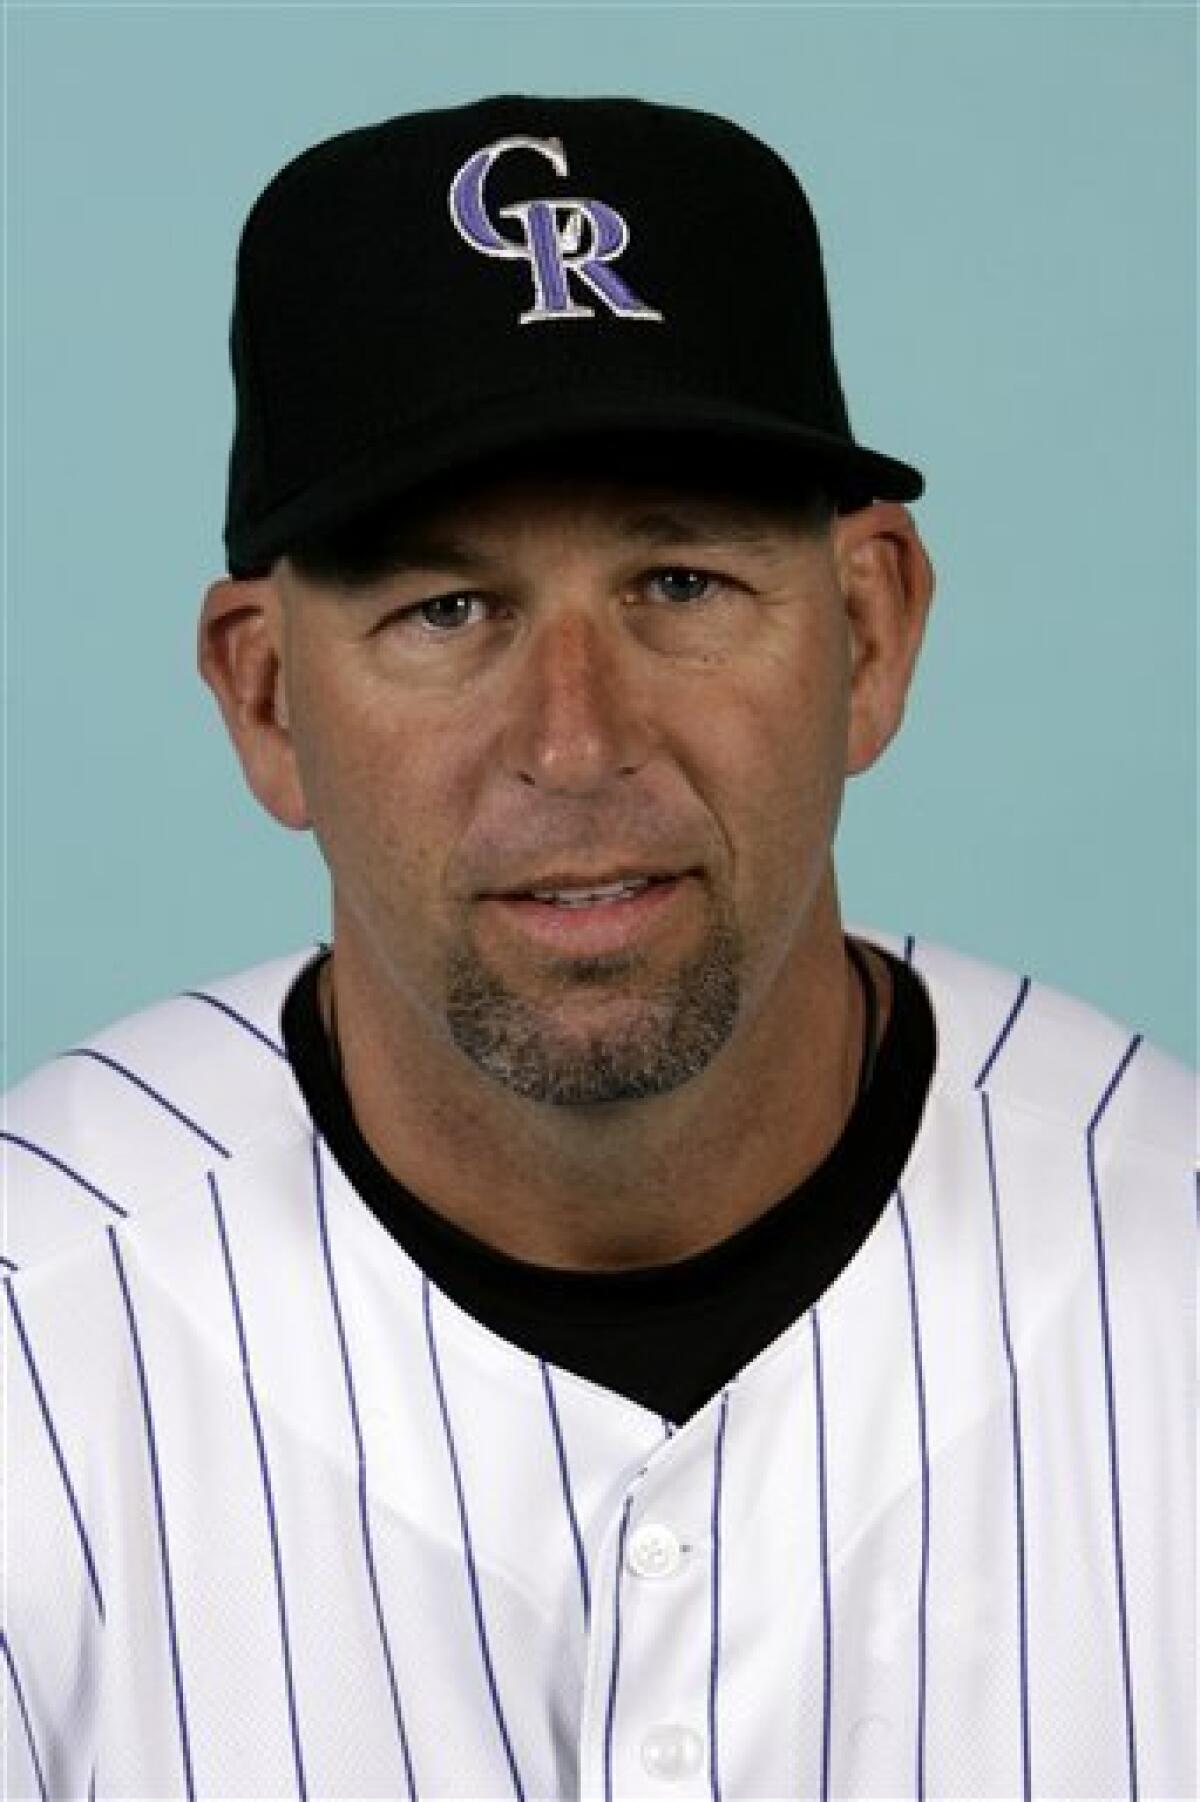 Rockies manager makes return to San Diego